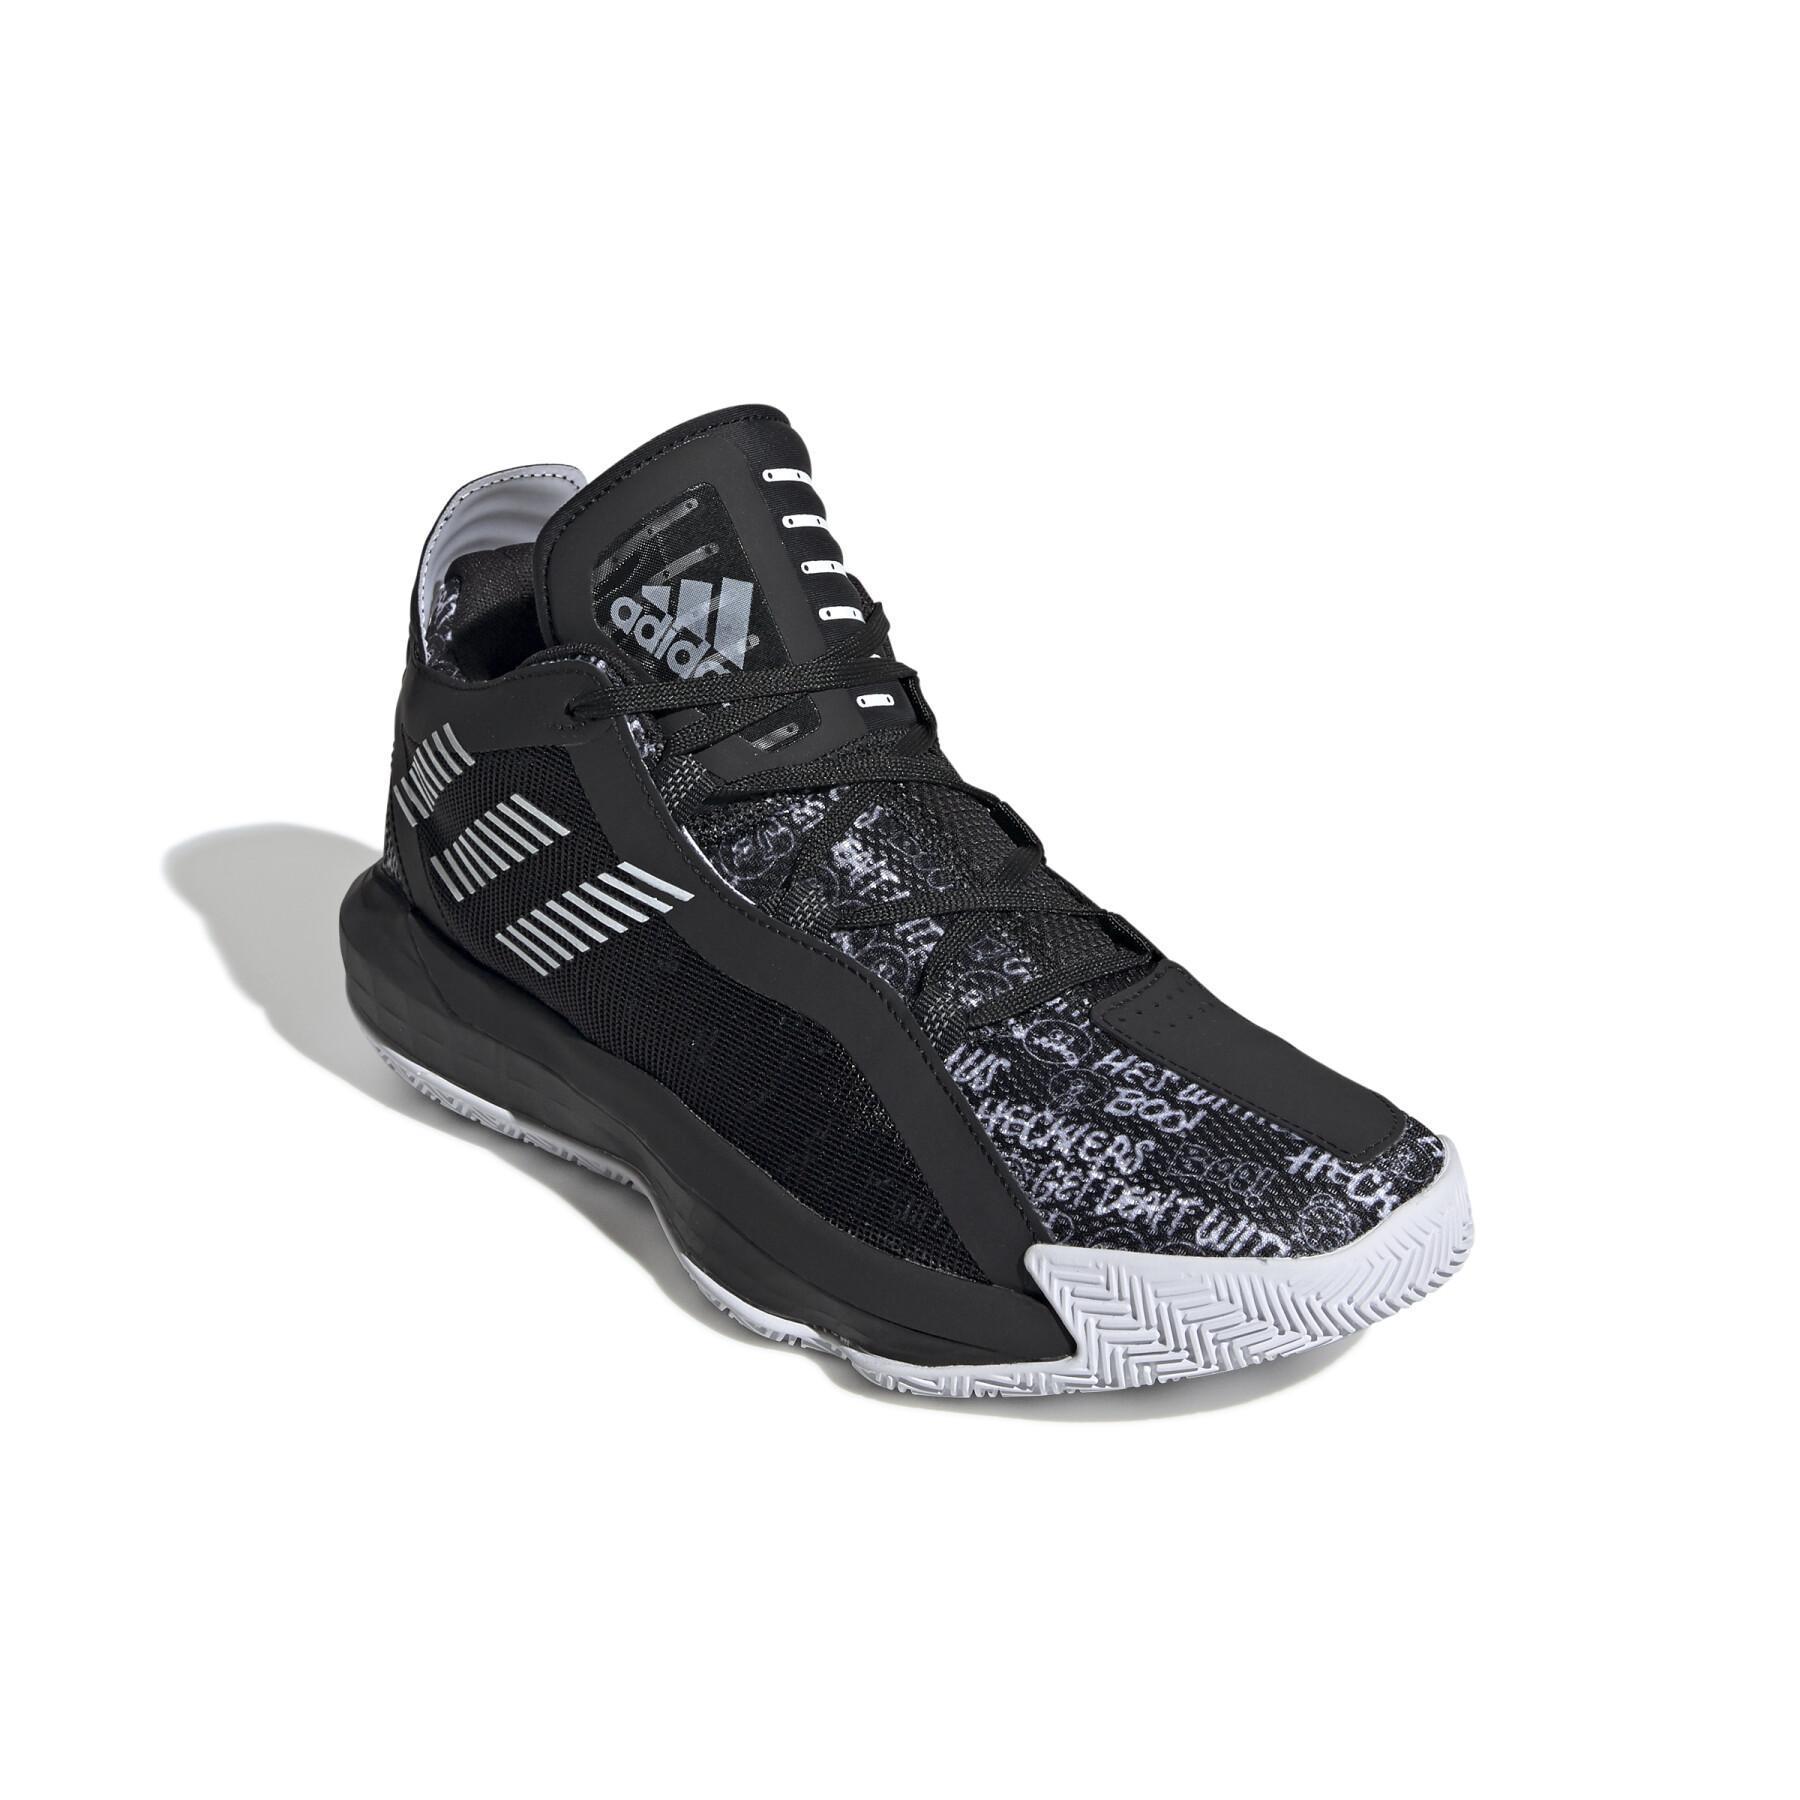 Chaussures indoor adidas Dame 6